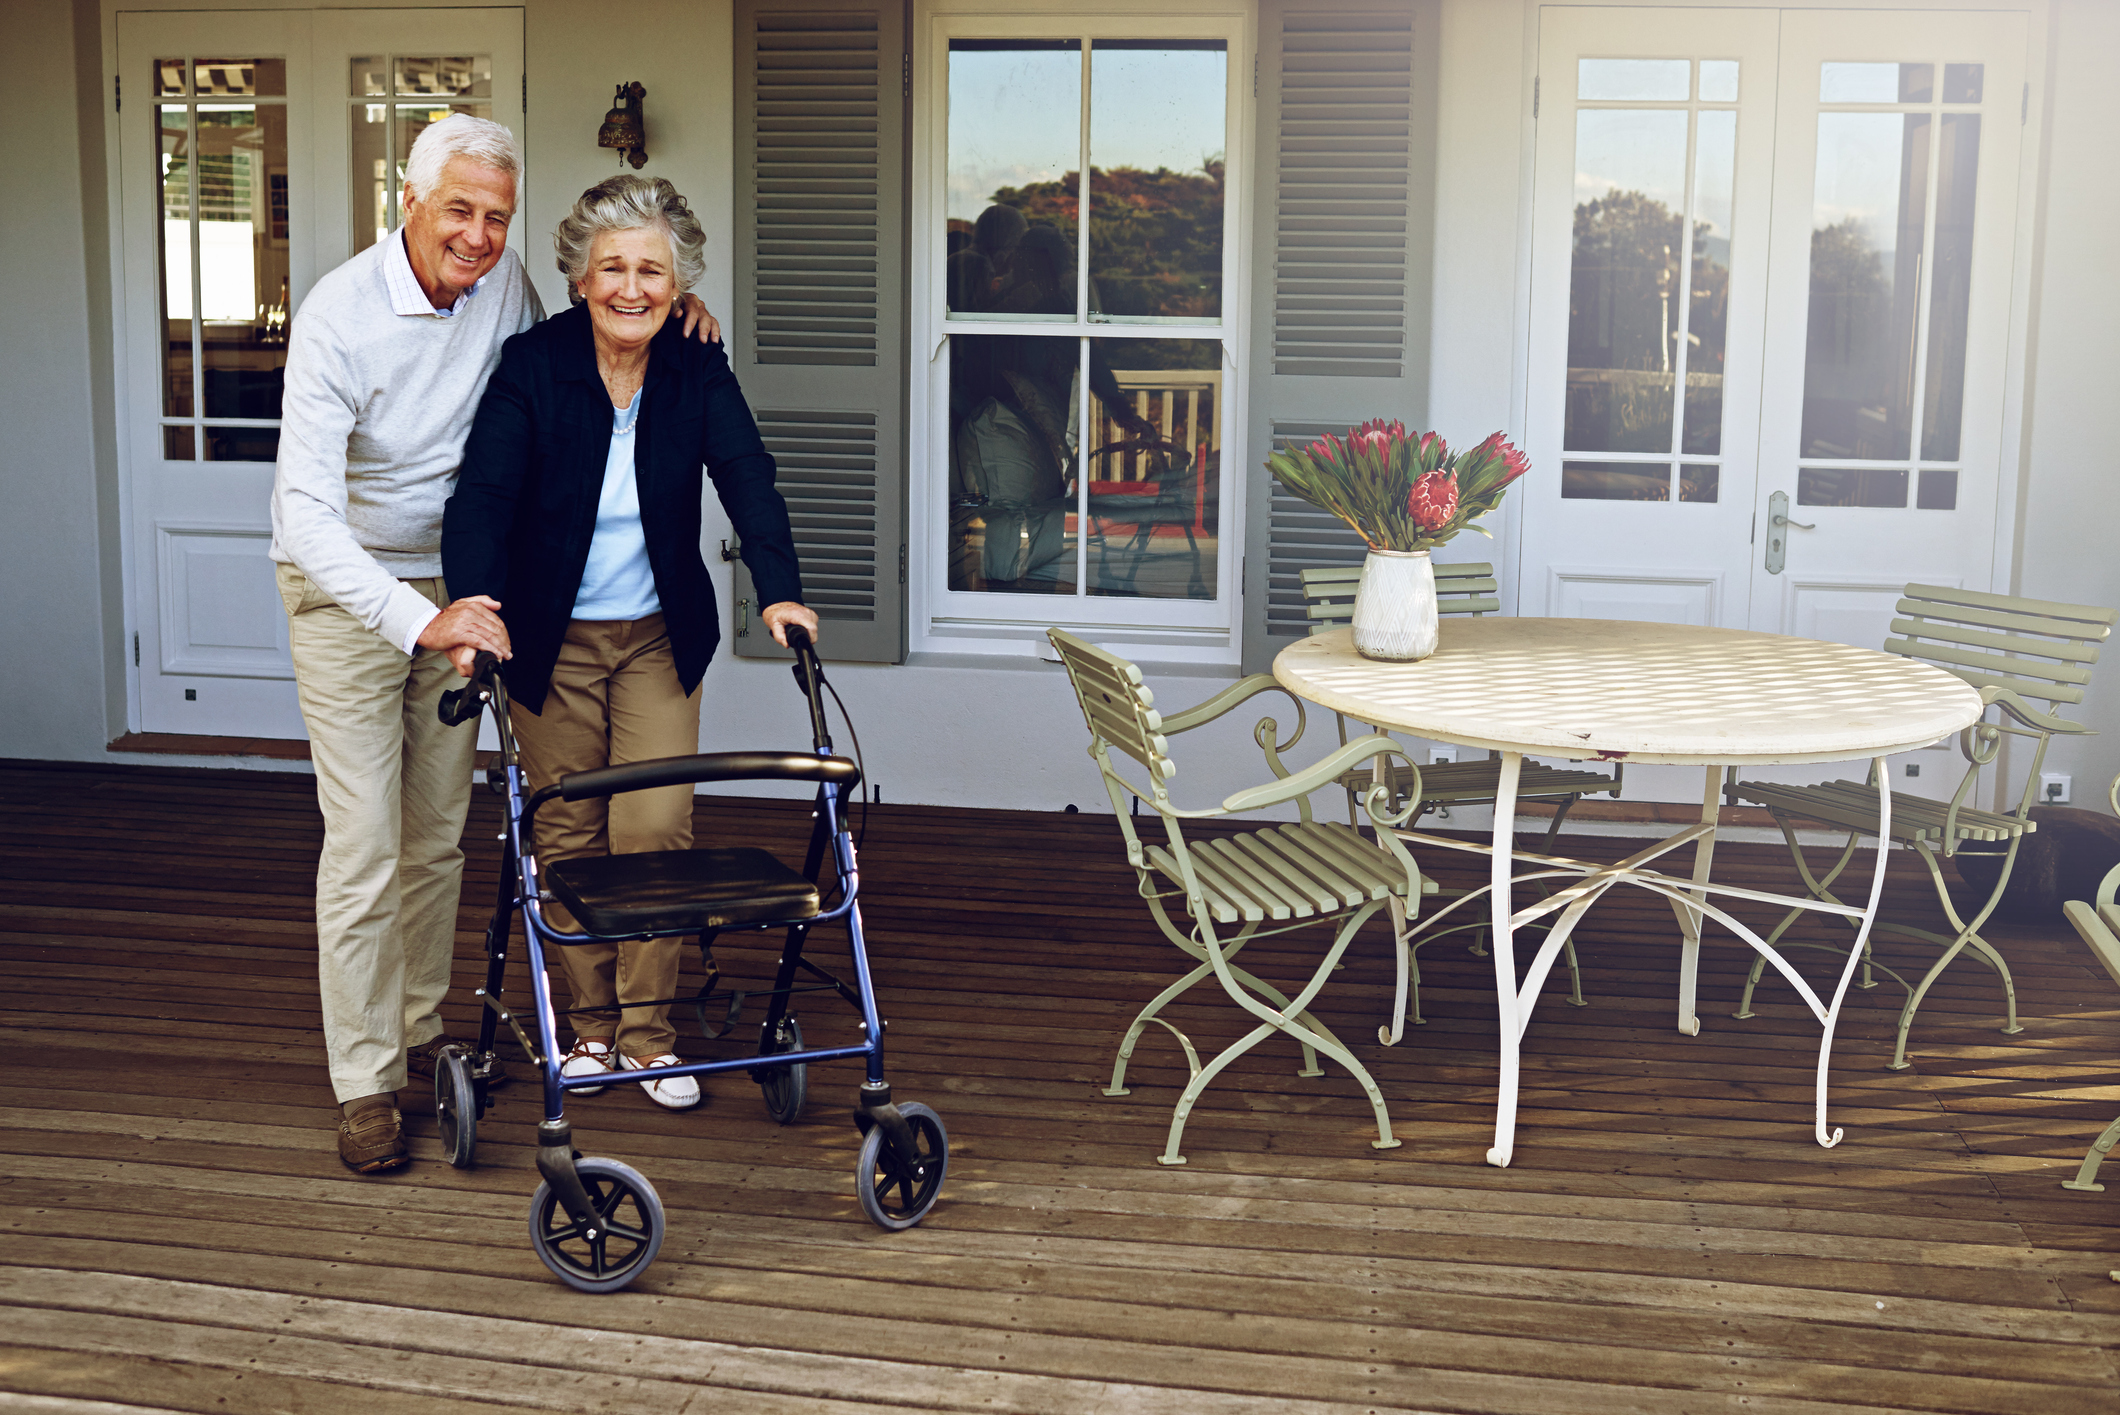 Portrait of a smiling senior woman using a walker with her husband beside her outside their home